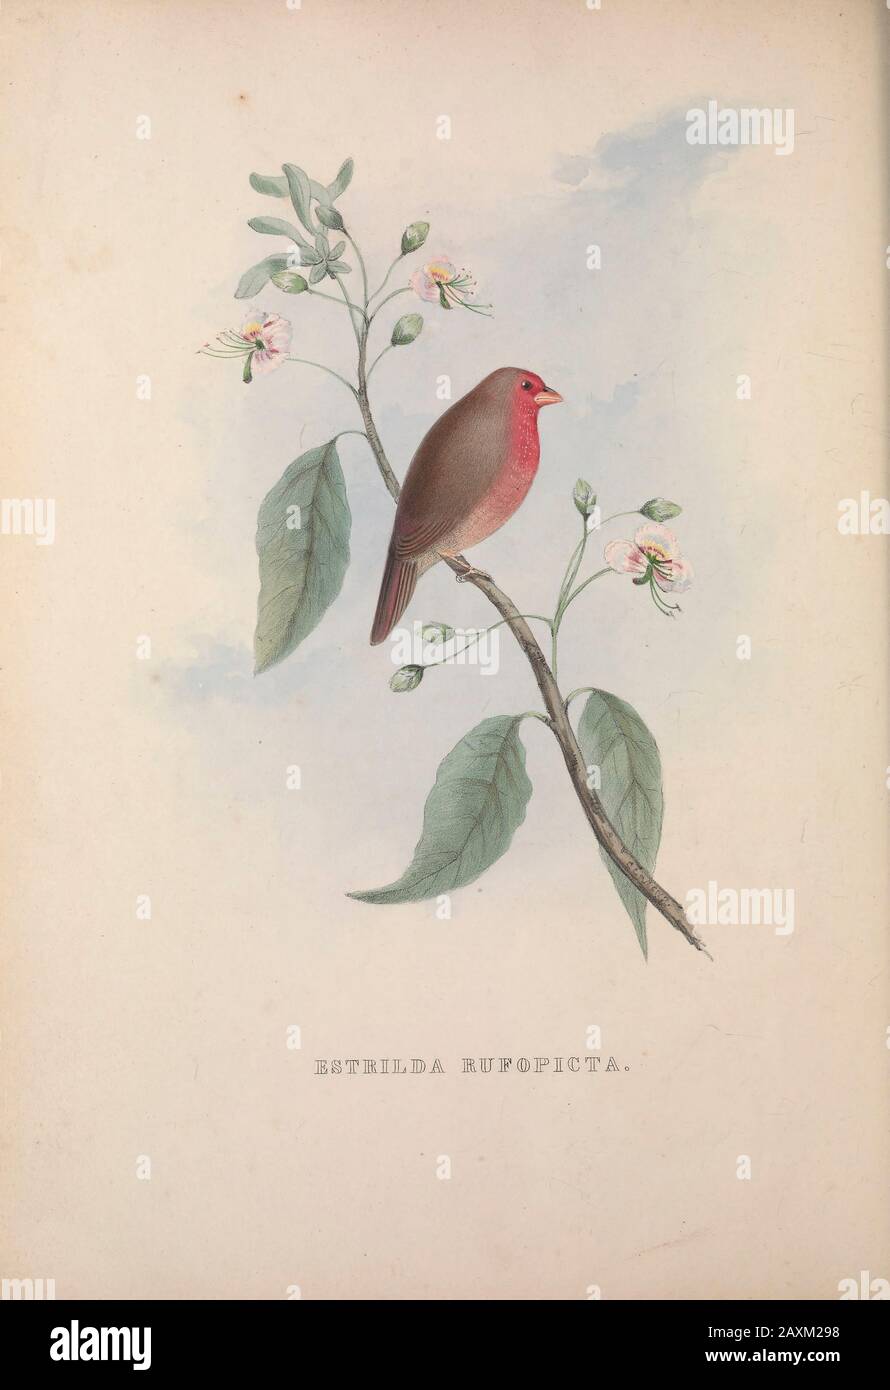 Estrildidae, or estrildid finch (Estrilda rufopicata) from Zoologia typica; or, Figures of new and rare animals and birds described in the proceedings Stock Photo